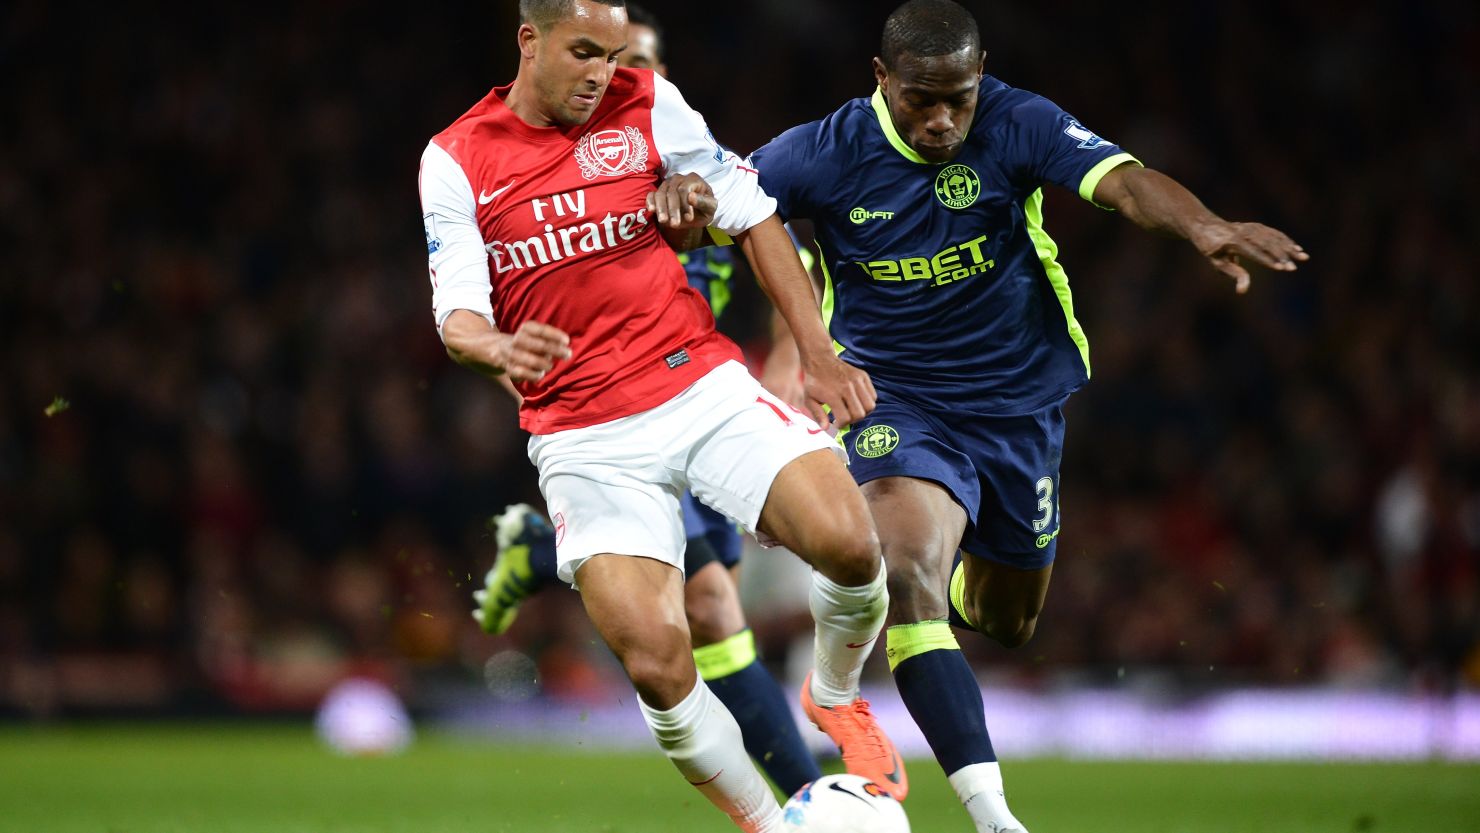 Arsenal's Theo Walcott is challenged by Maynor Figueroa of Wigan during Monday's English Premier League match.